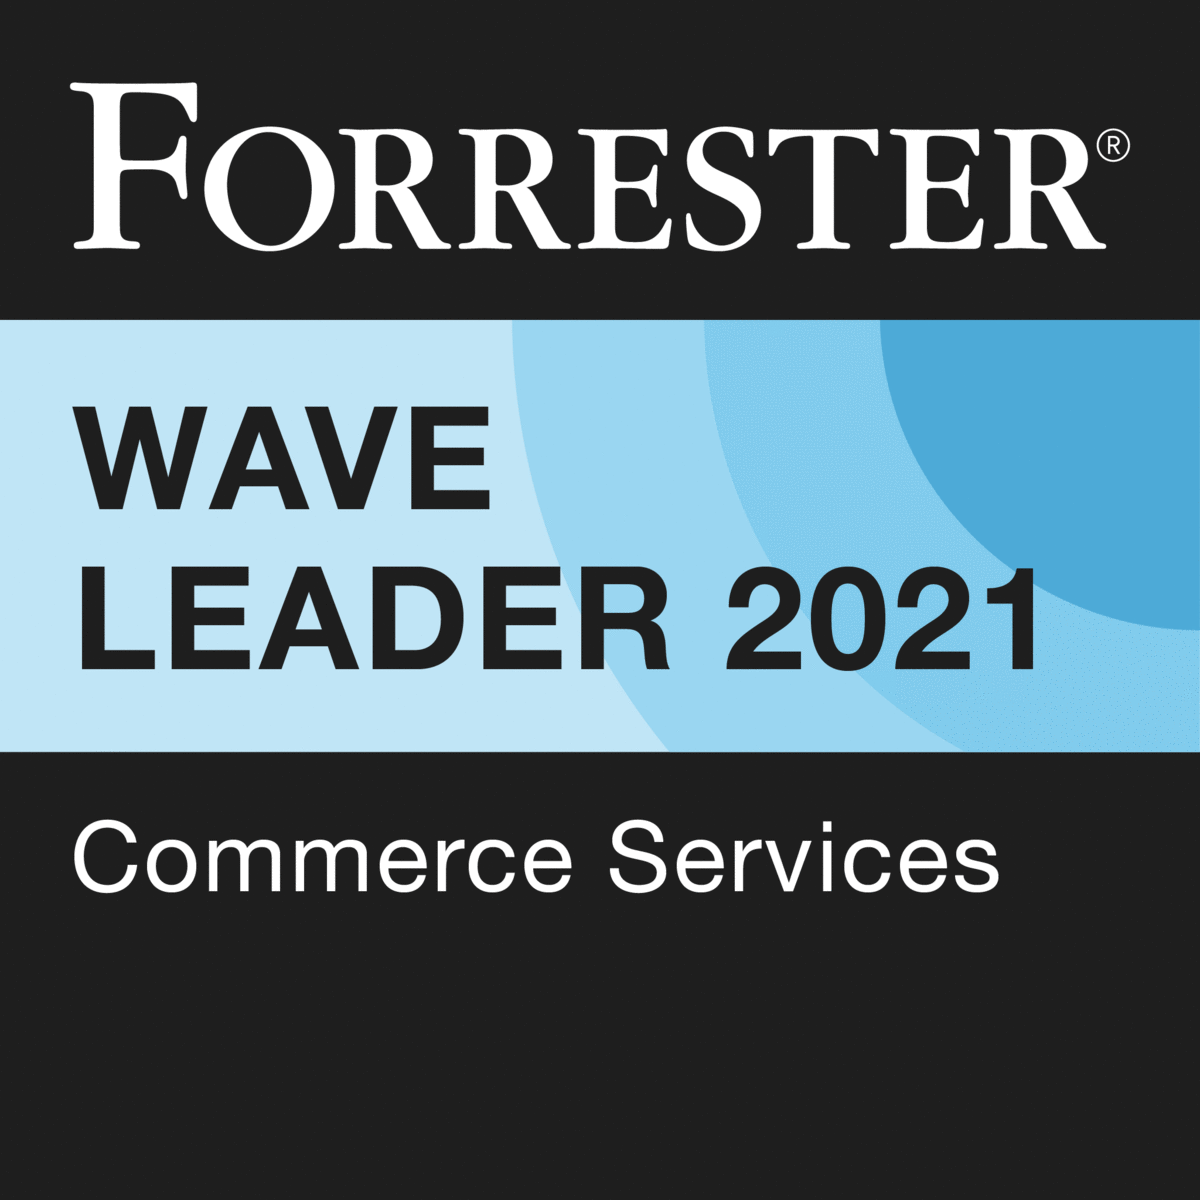 WPP has been named a Leader among commerce services providers by Forrester Research, Inc."